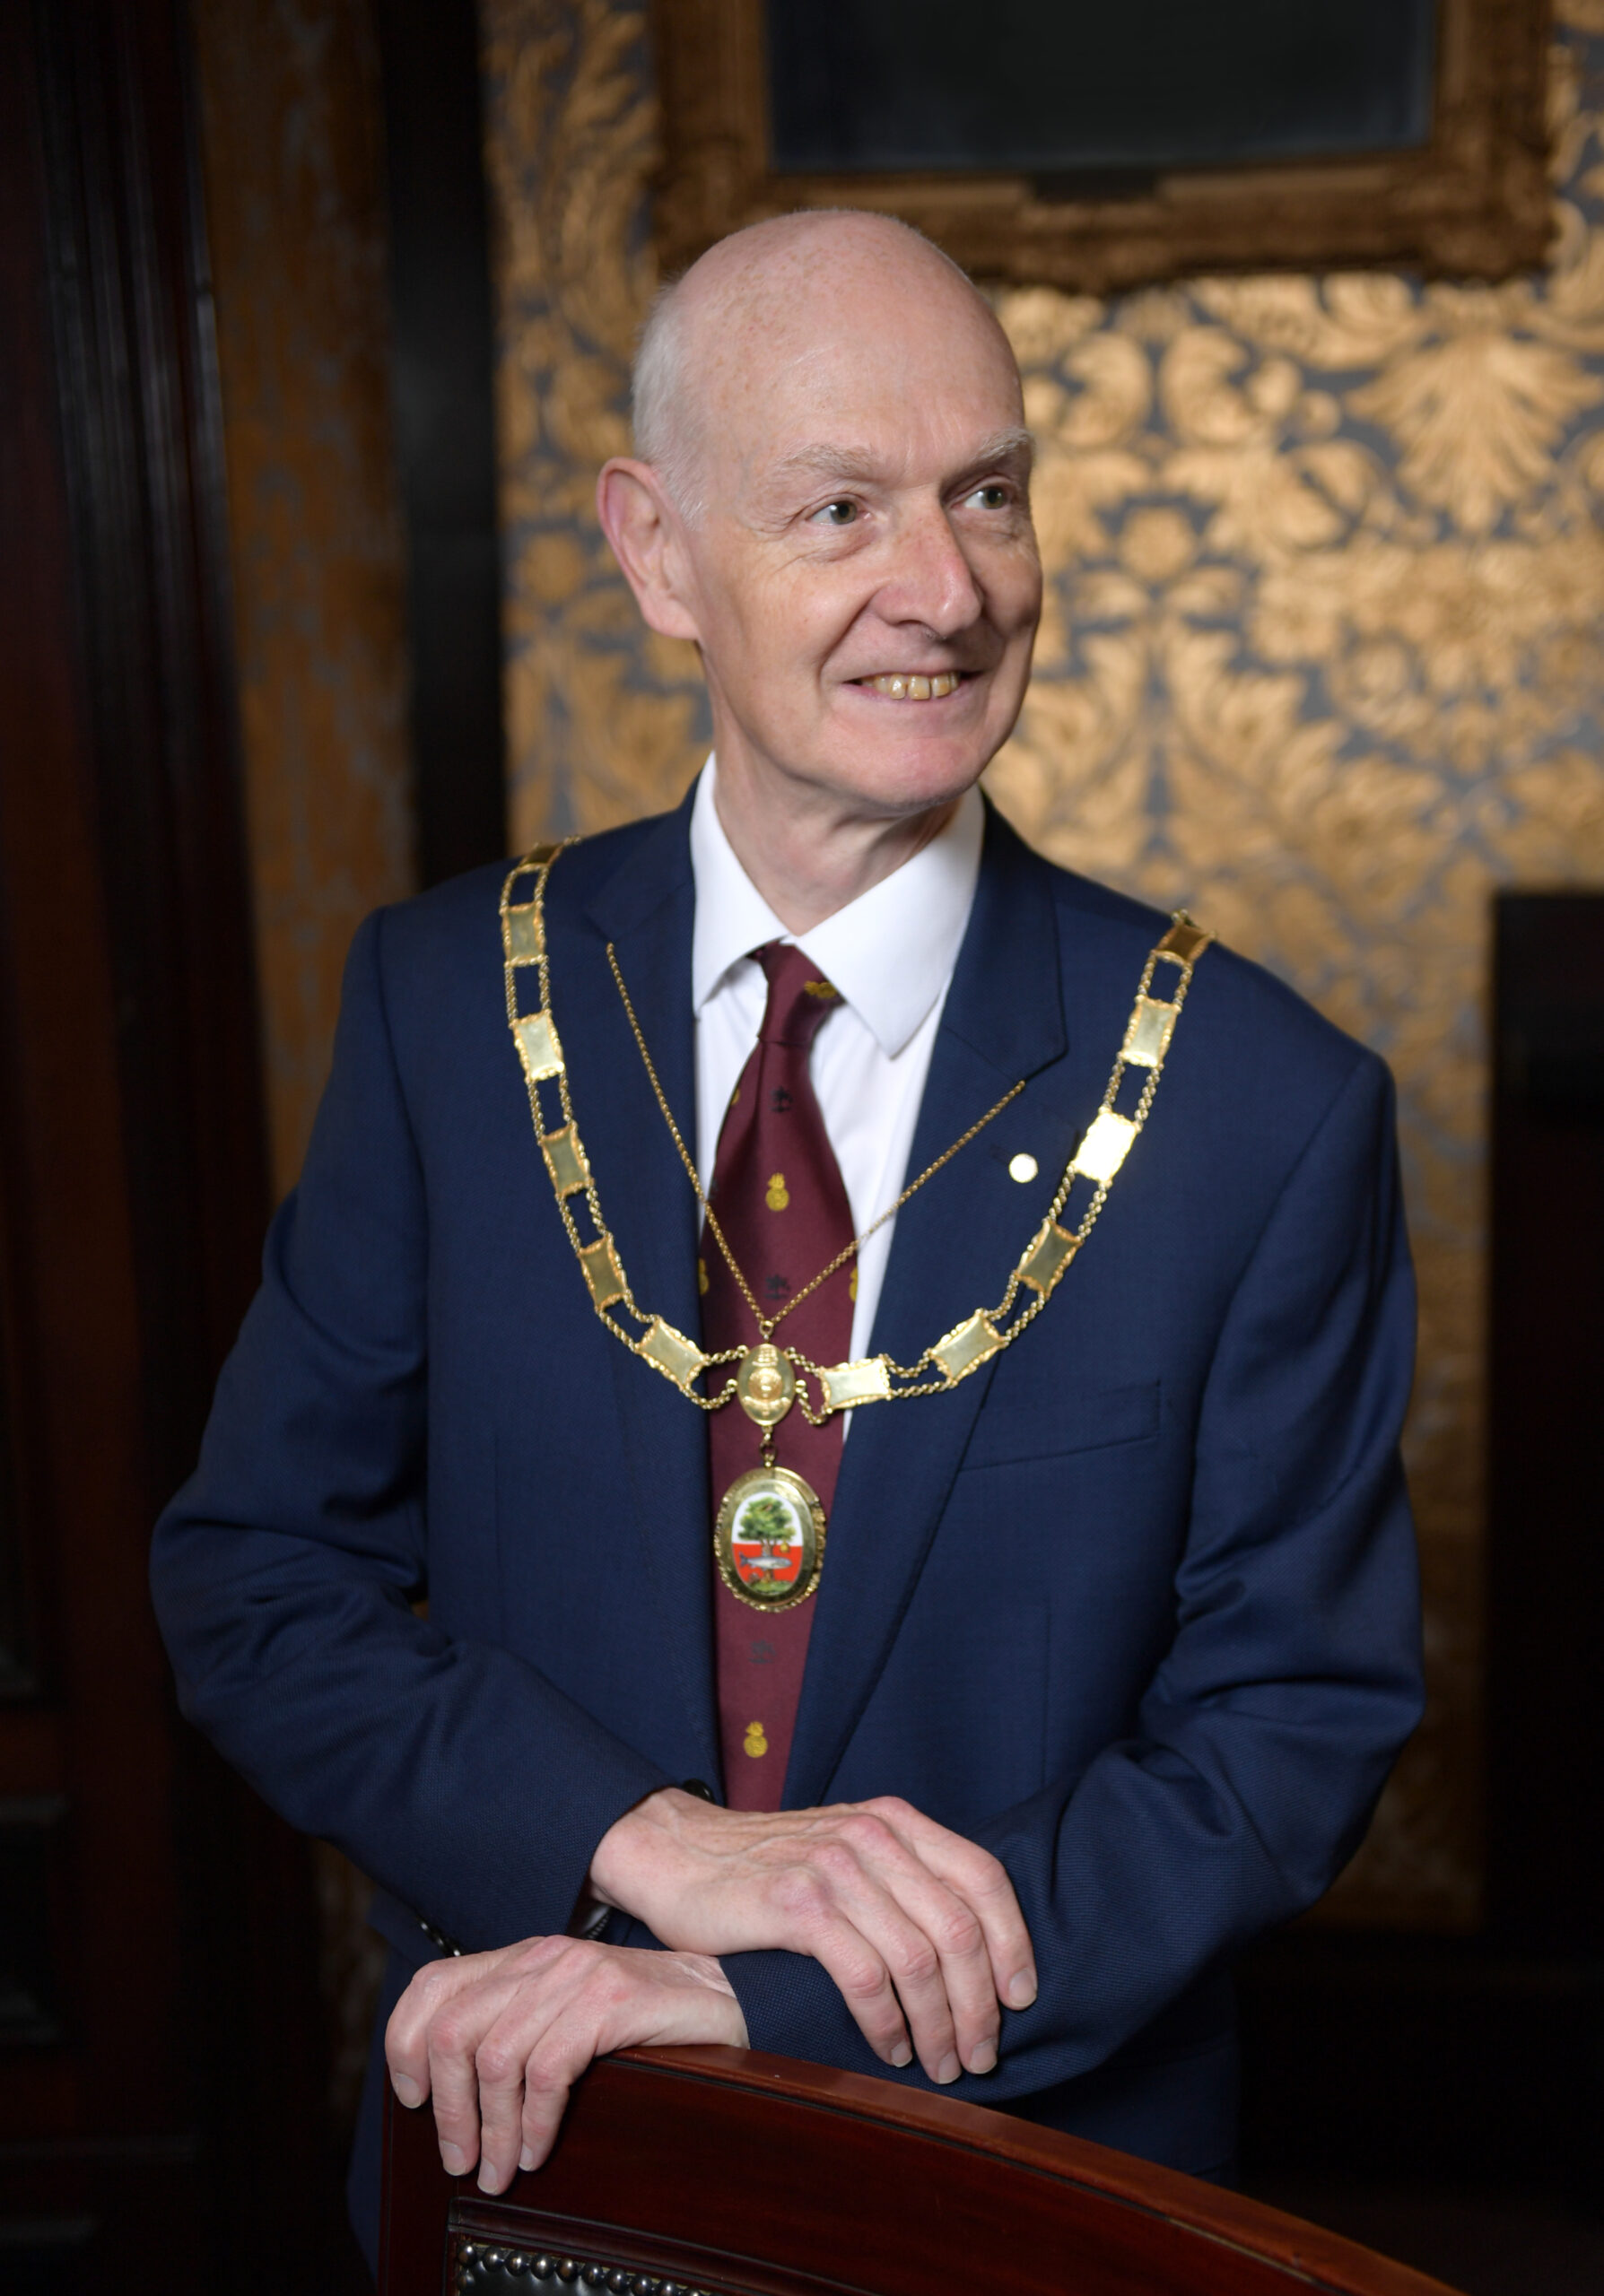 The Merchants House of Glasgow welcomes Andrew McFarlane as Lord Dean of Guild